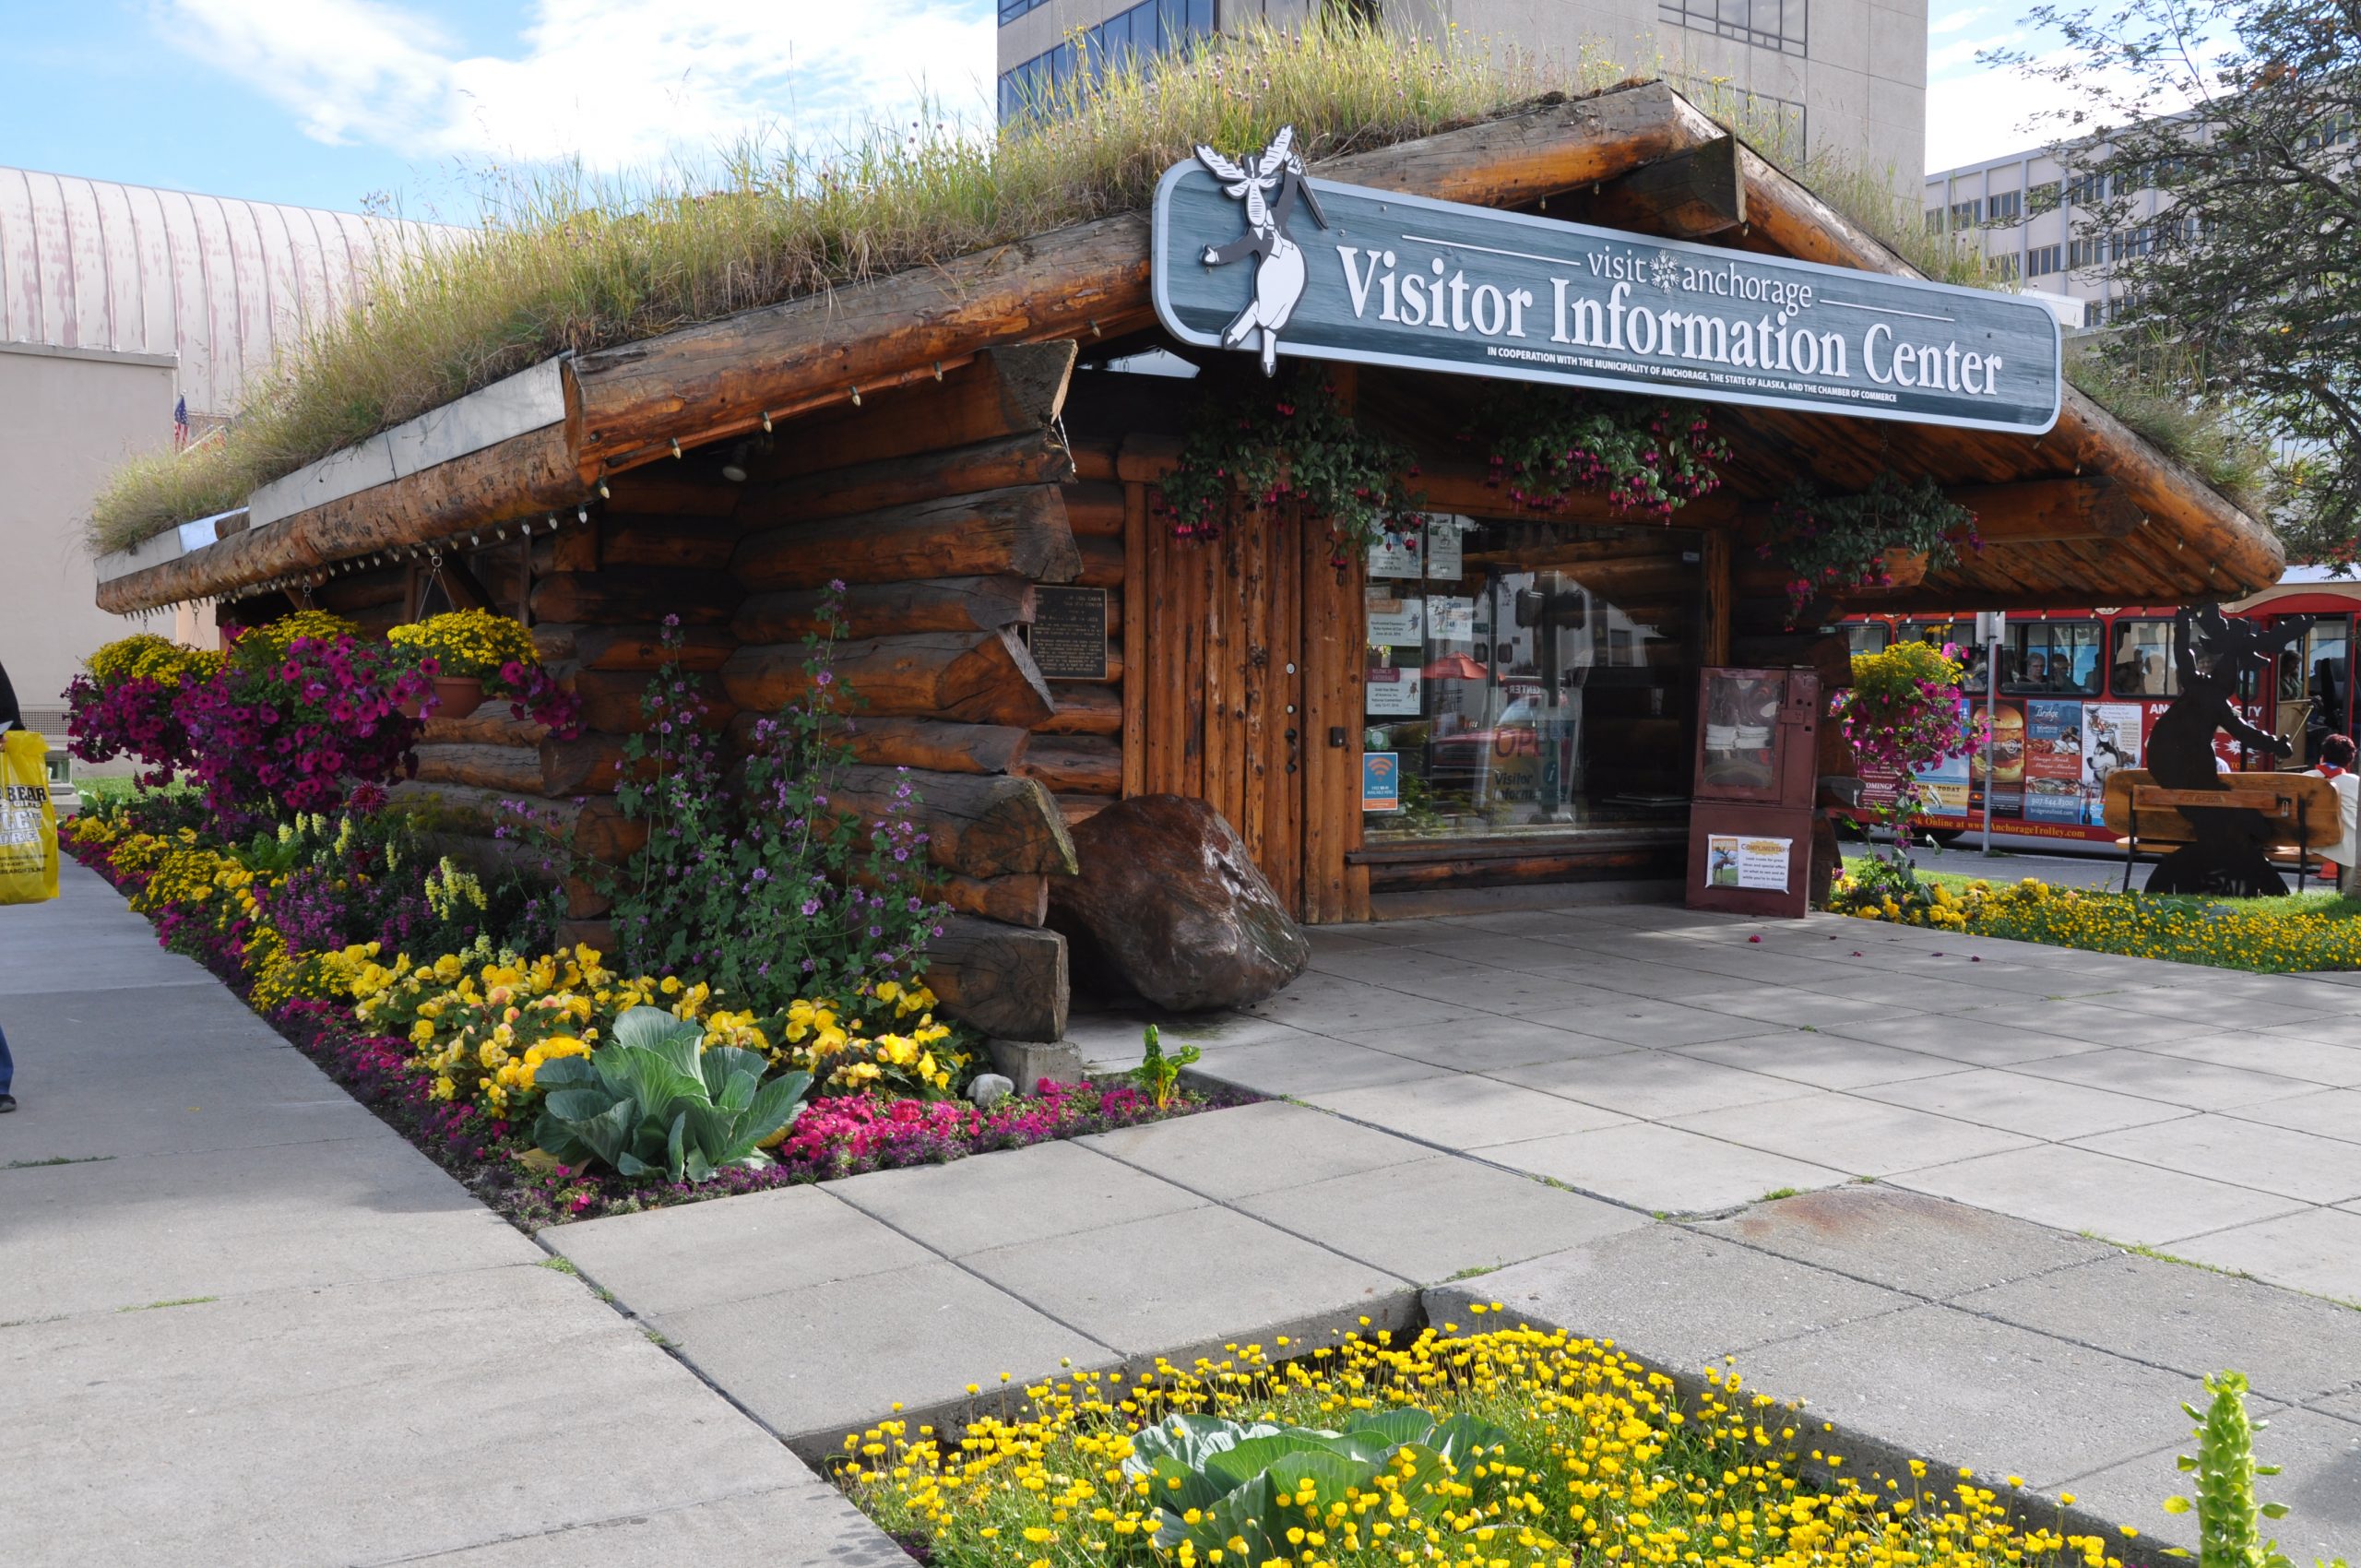 Make sure to visit the visitor center in downtown Anchorage